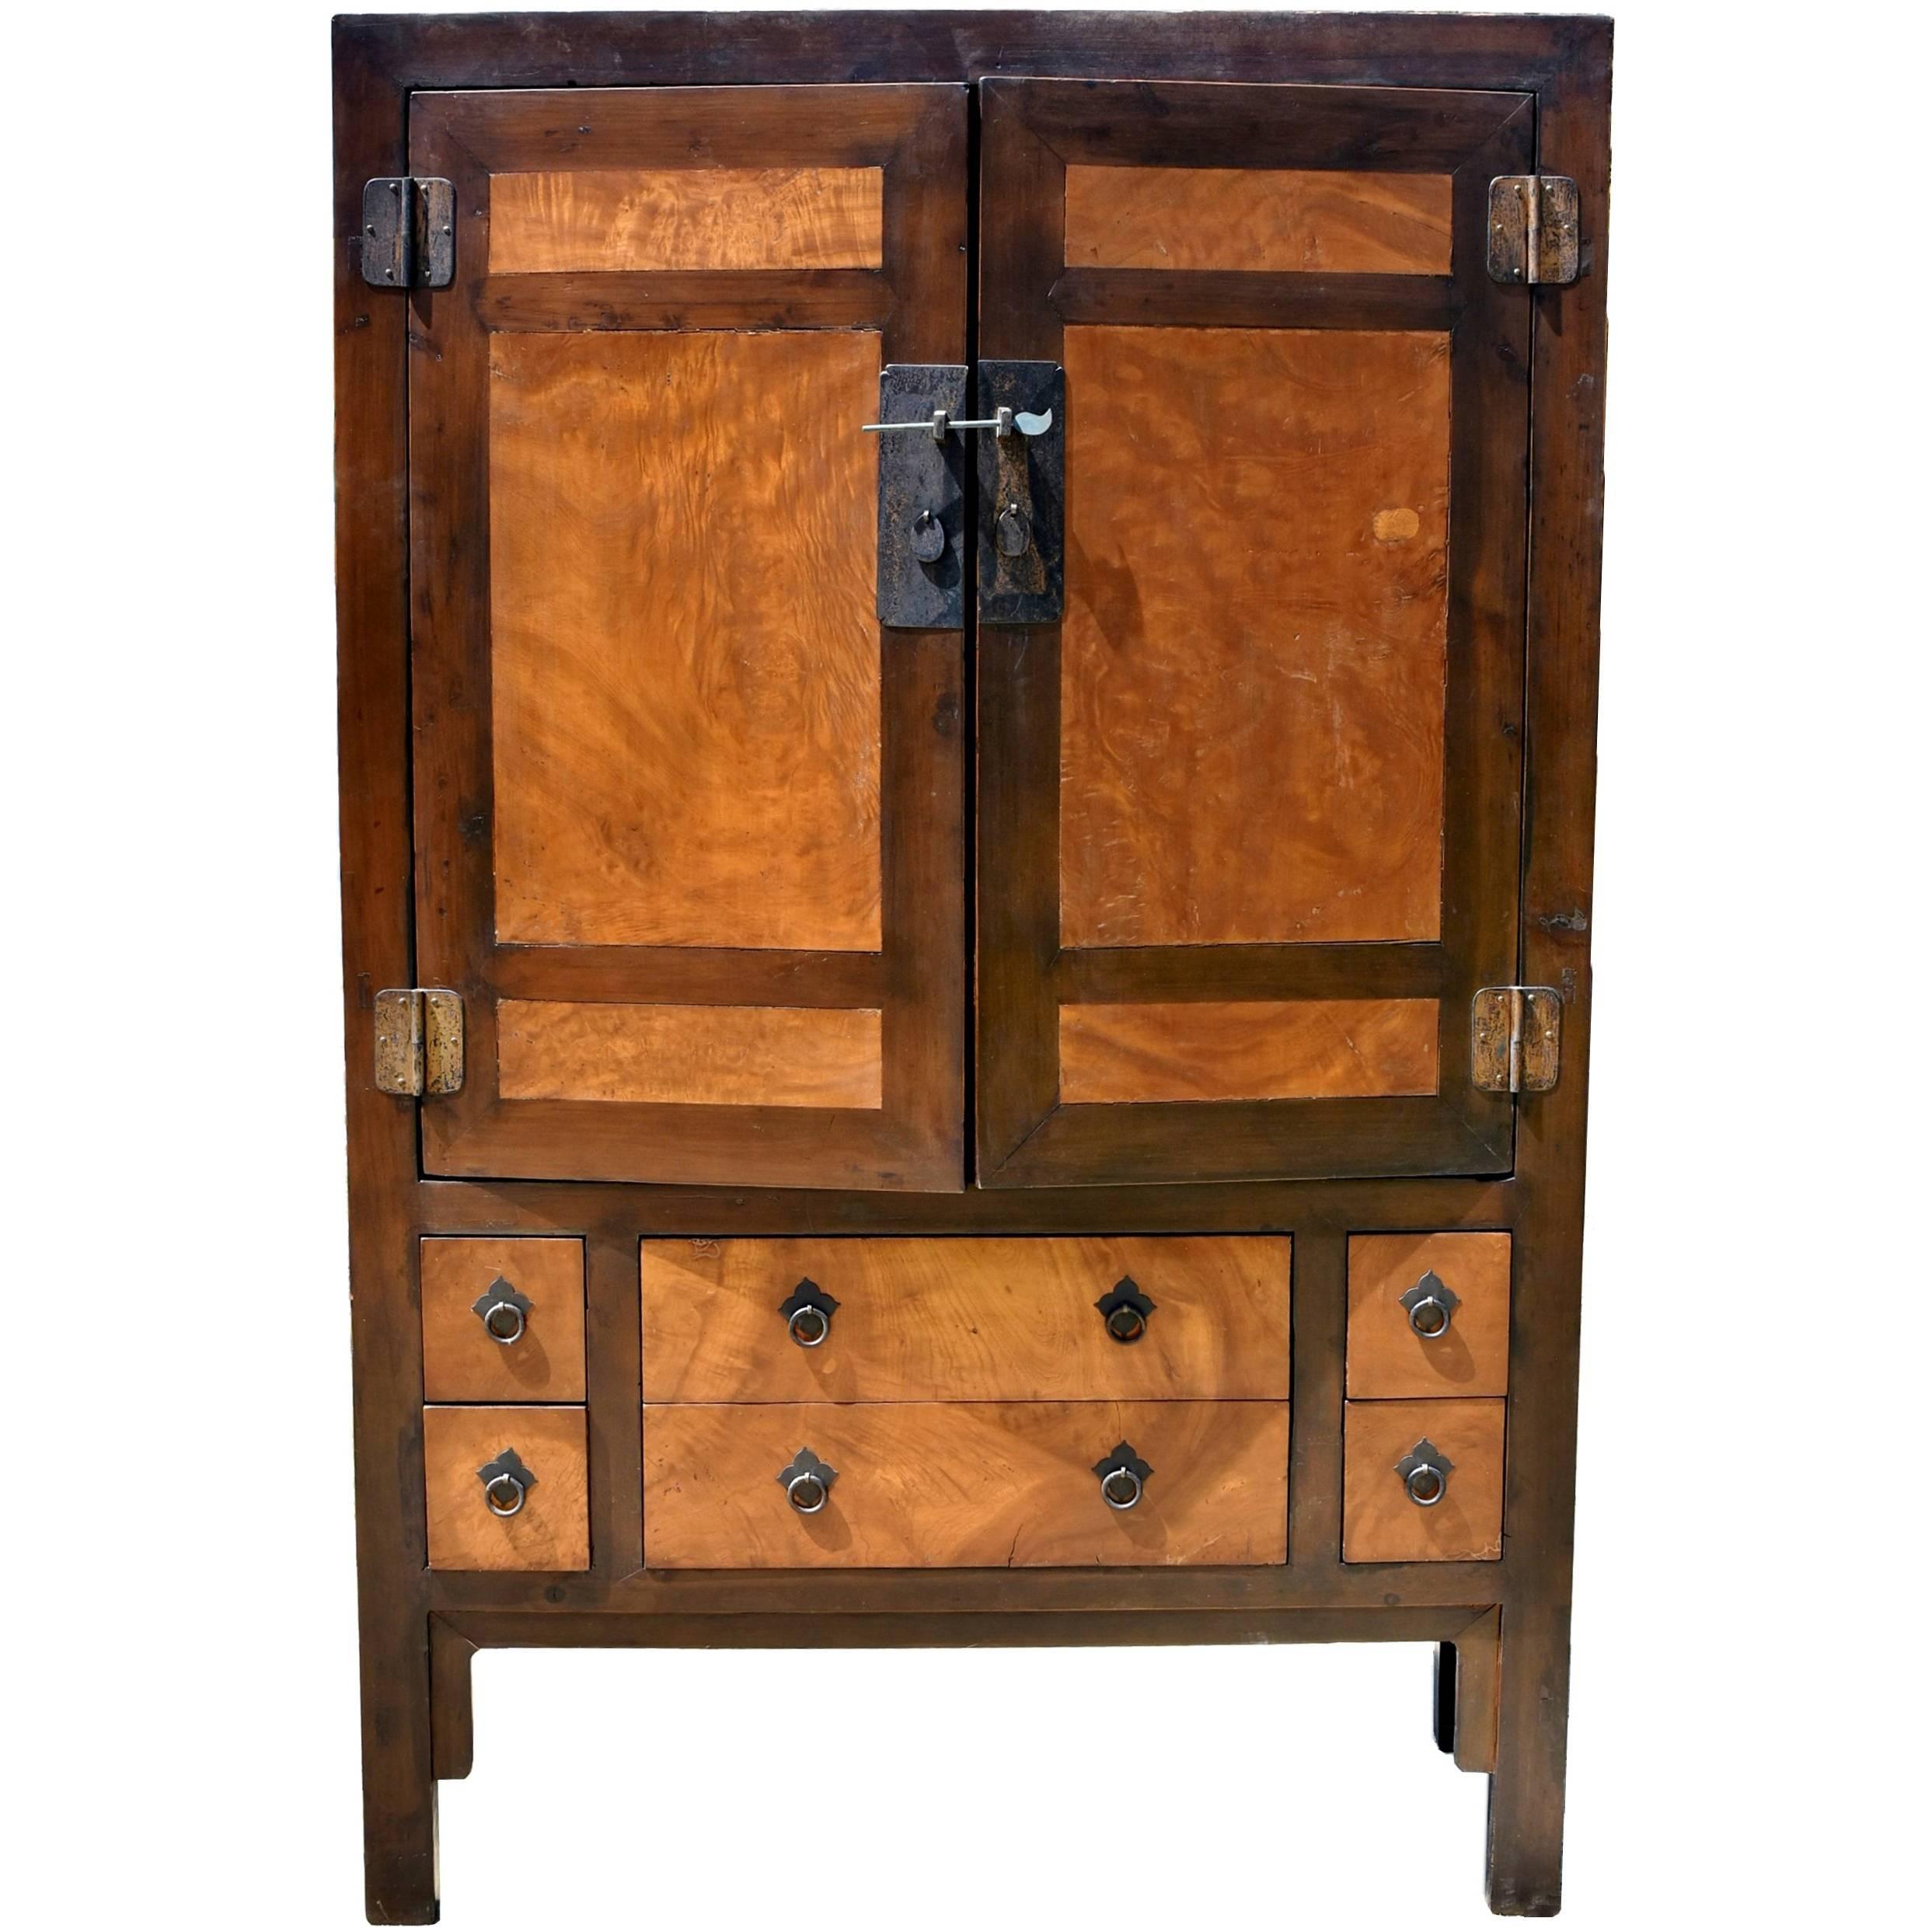 Large Burl Wood Armoire, Brown and Gold Burl Wood Cabinet